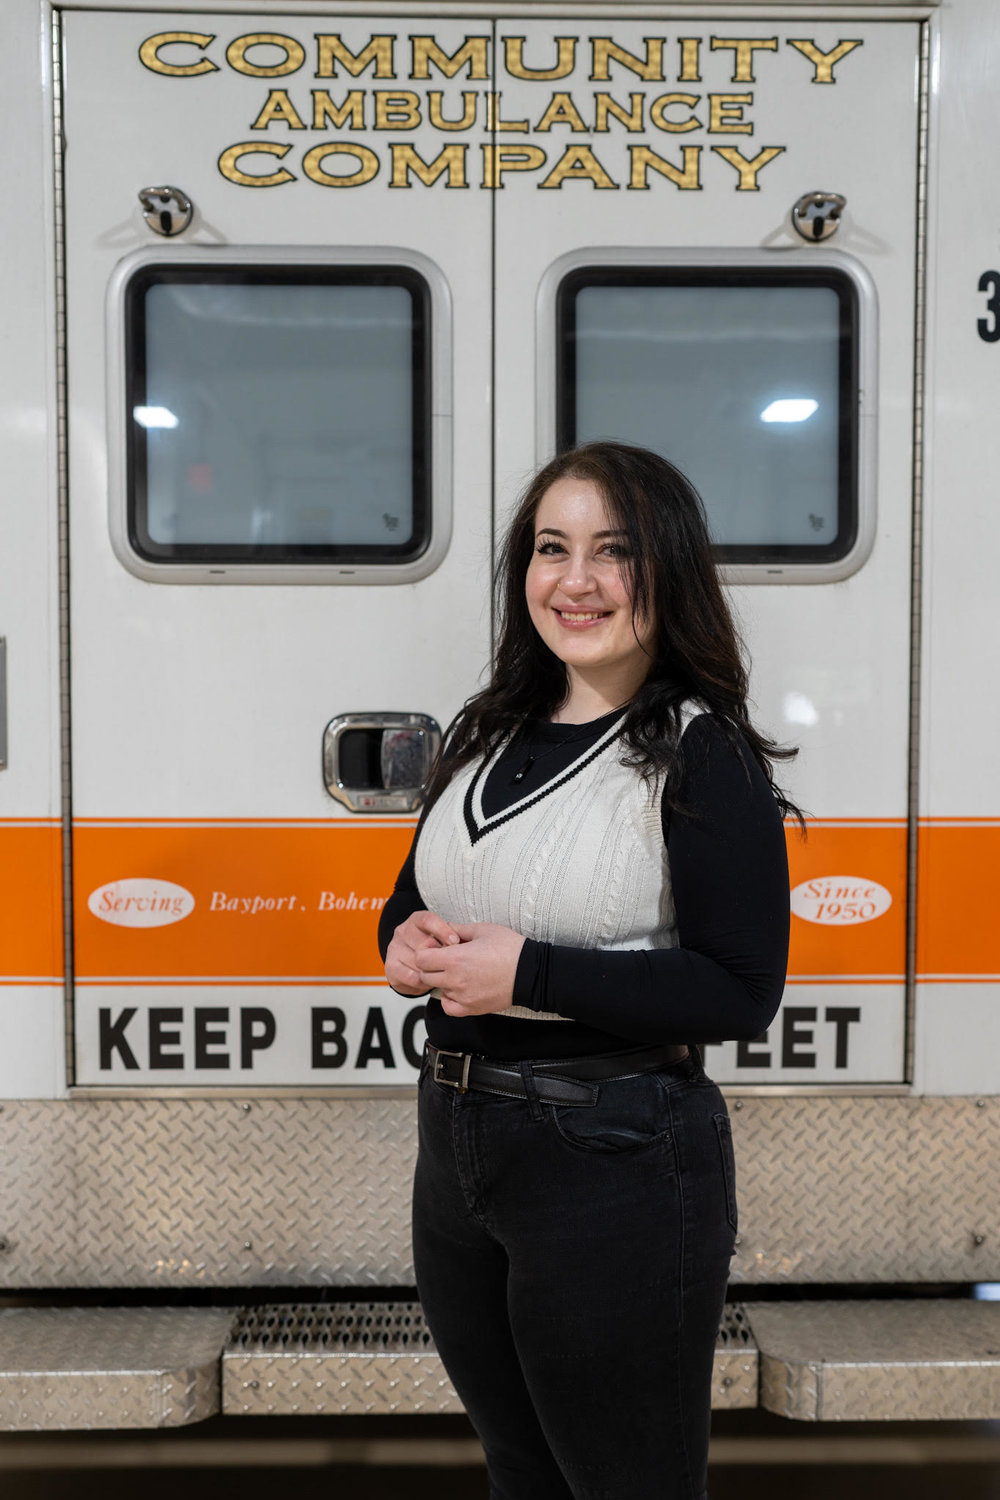 For our inaugural installment of “Inspirational Youth: Leadership of Young Women” for Women’s History Month, we have Sayville Community Ambulance EMT Samantha Eisner of Sayville, who was nominated by her mother for her exceptional work and commitment as a first responder.